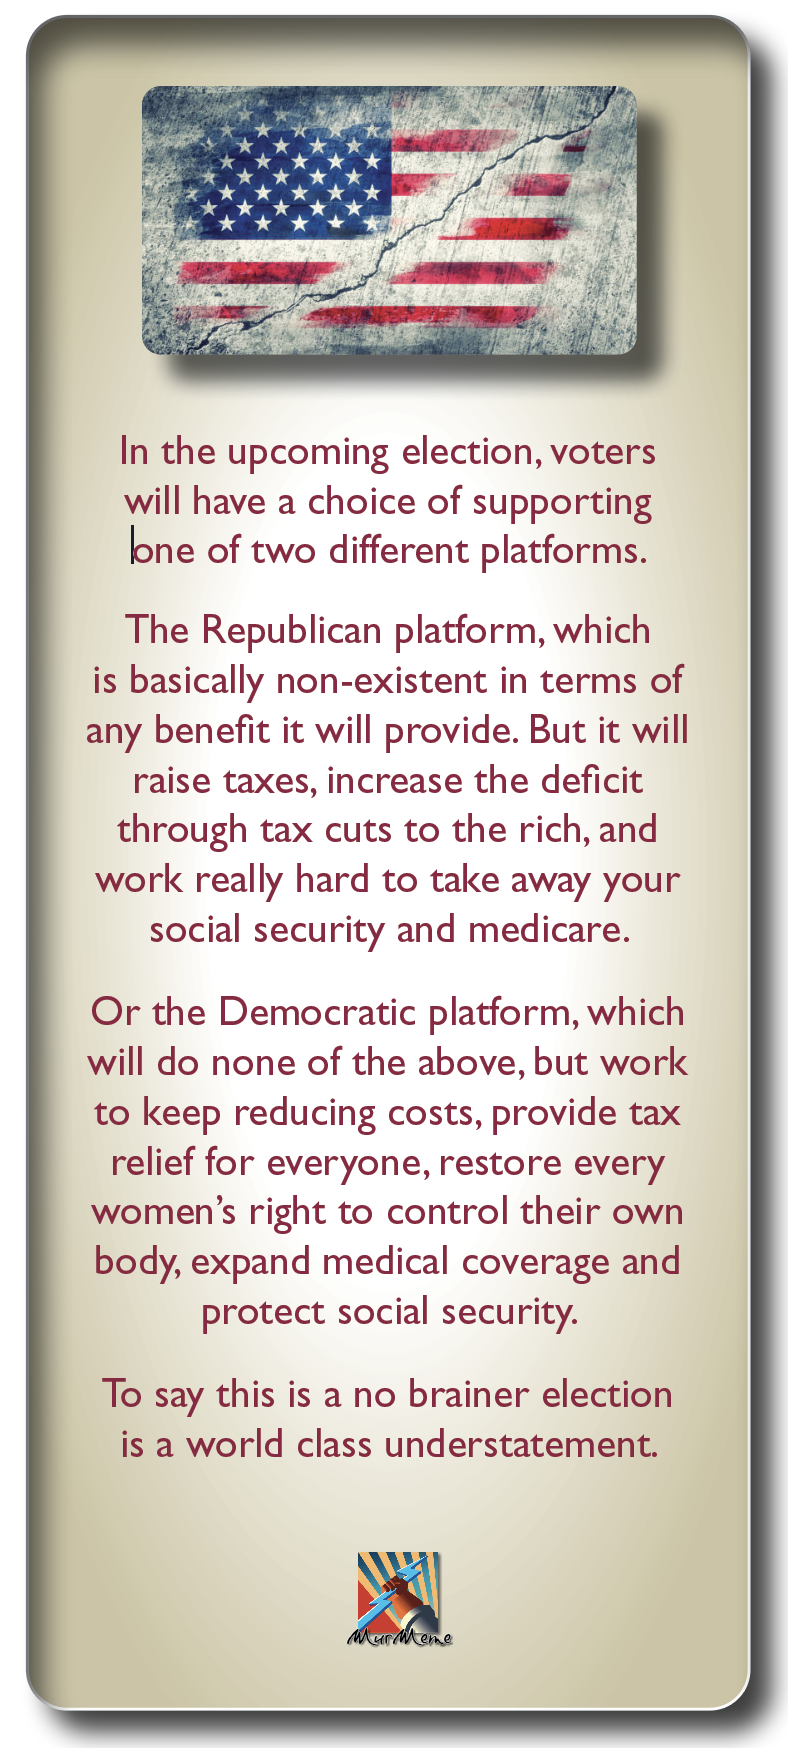 In the upcoming election, voters
will have a choice of supporting
bne of two different platforms.

The Republican platform, which
is basically non-existent in terms of
any benefit it will provide. But it will

raise taxes, increase the deficit

through tax cuts to the rich, and
work really hard to take away your
social security and medicare.

Or the Democratic platform, which
will do none of the above, but work
to keep reducing costs, provide tax
relief for everyone, restore every
women’s right to control their own
body, expand medical coverage and
protect social security.

To say this is a no brainer election
is a world class understatement.

BM